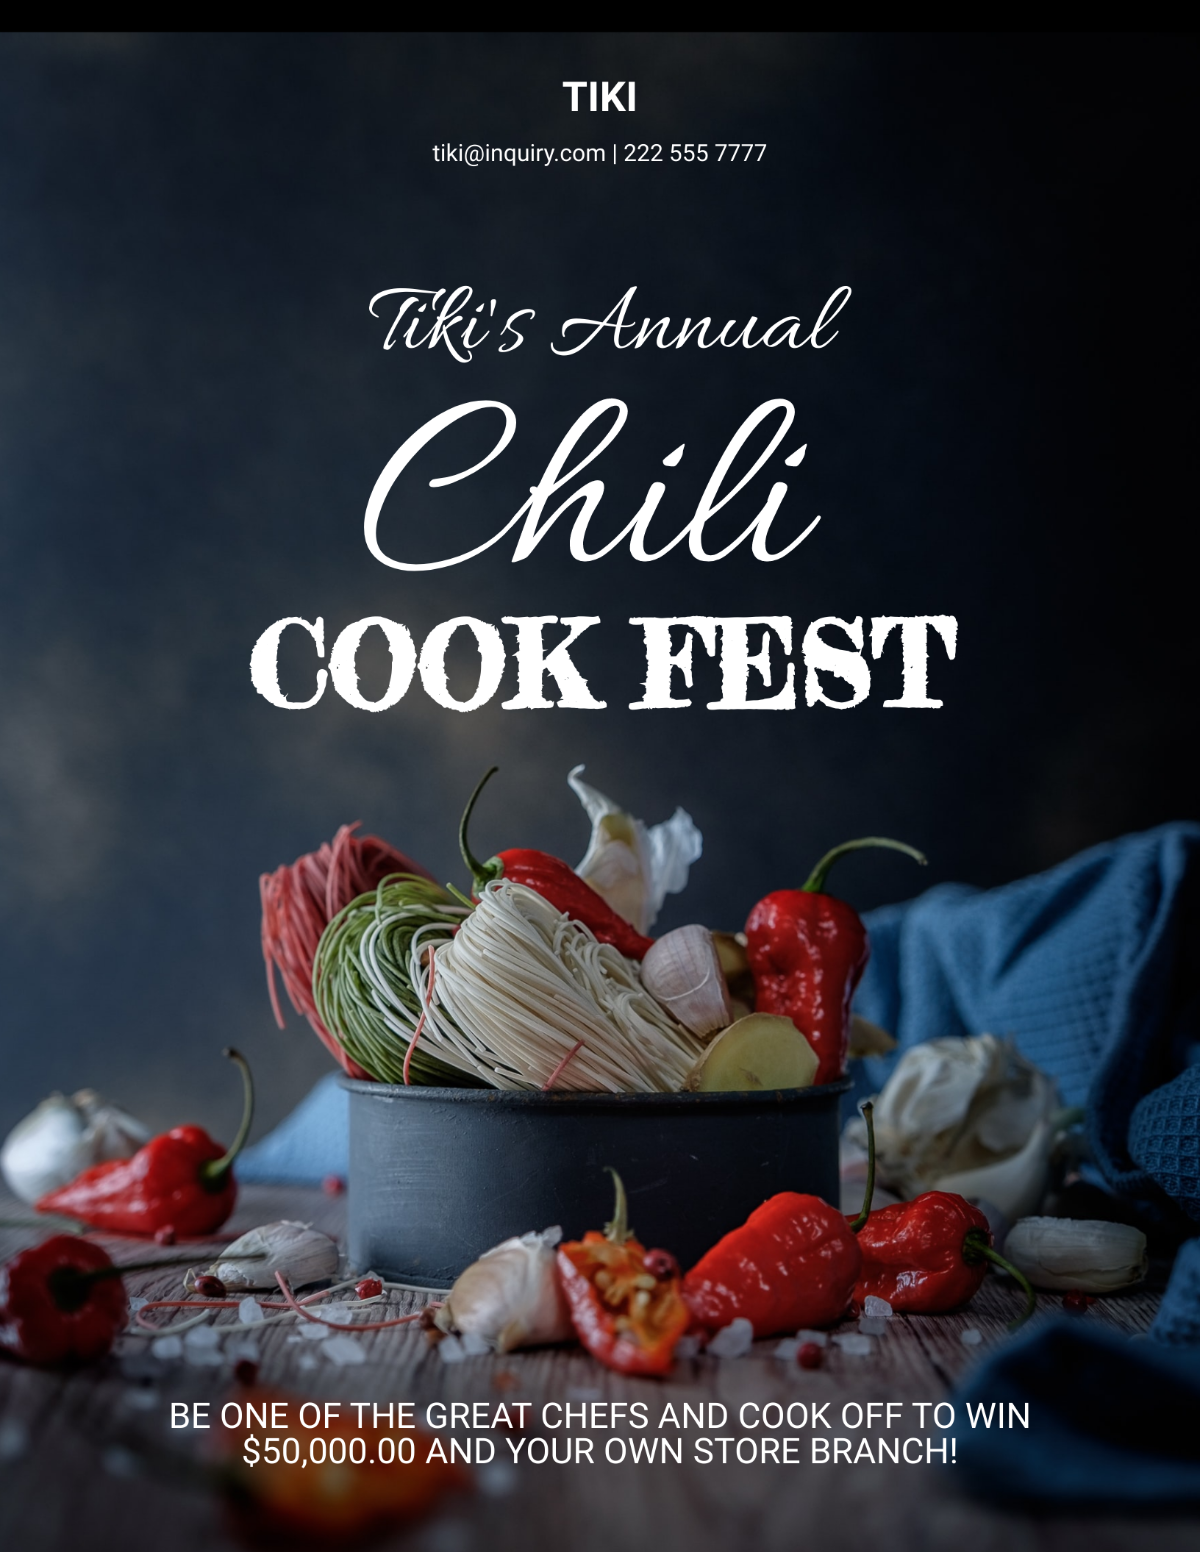 Chili Cook Off Announcement Flyer